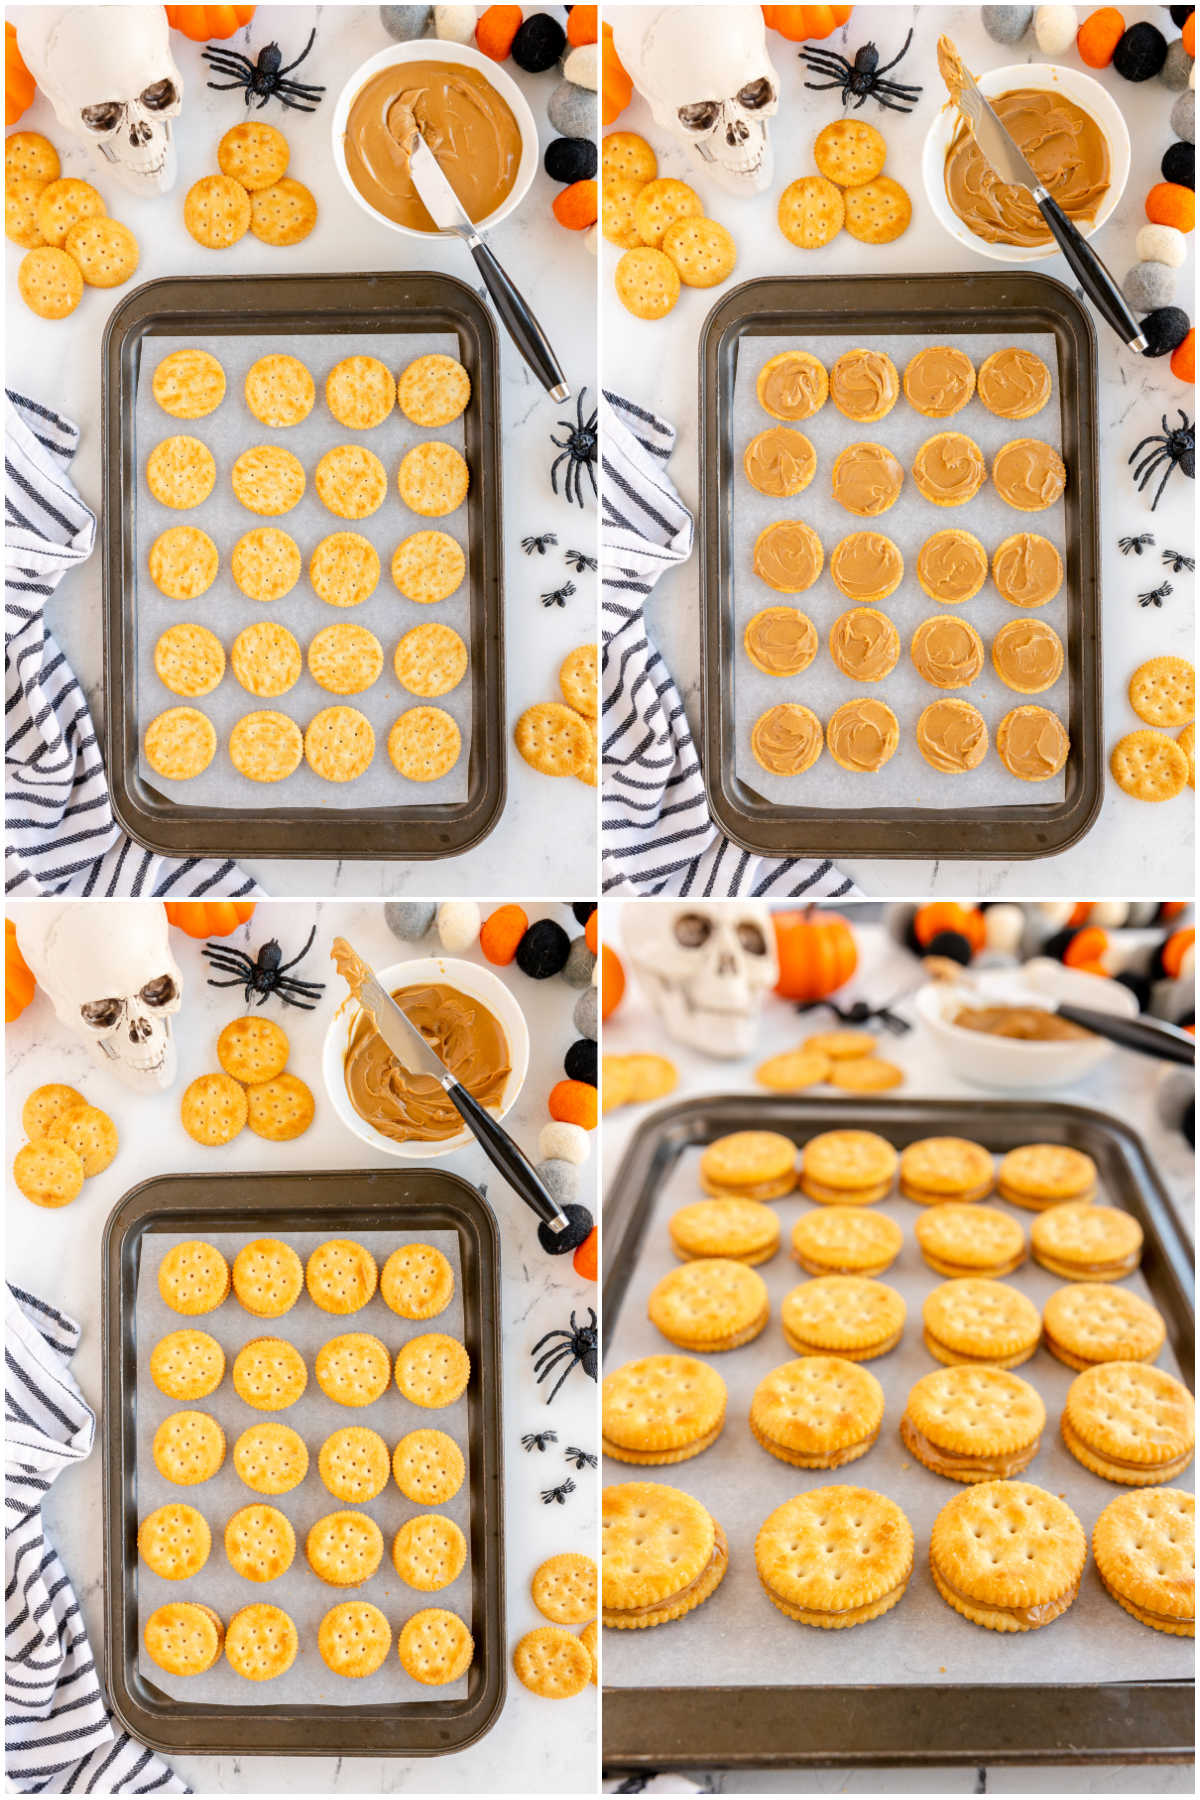 collage of images showing making peanut butter crackers